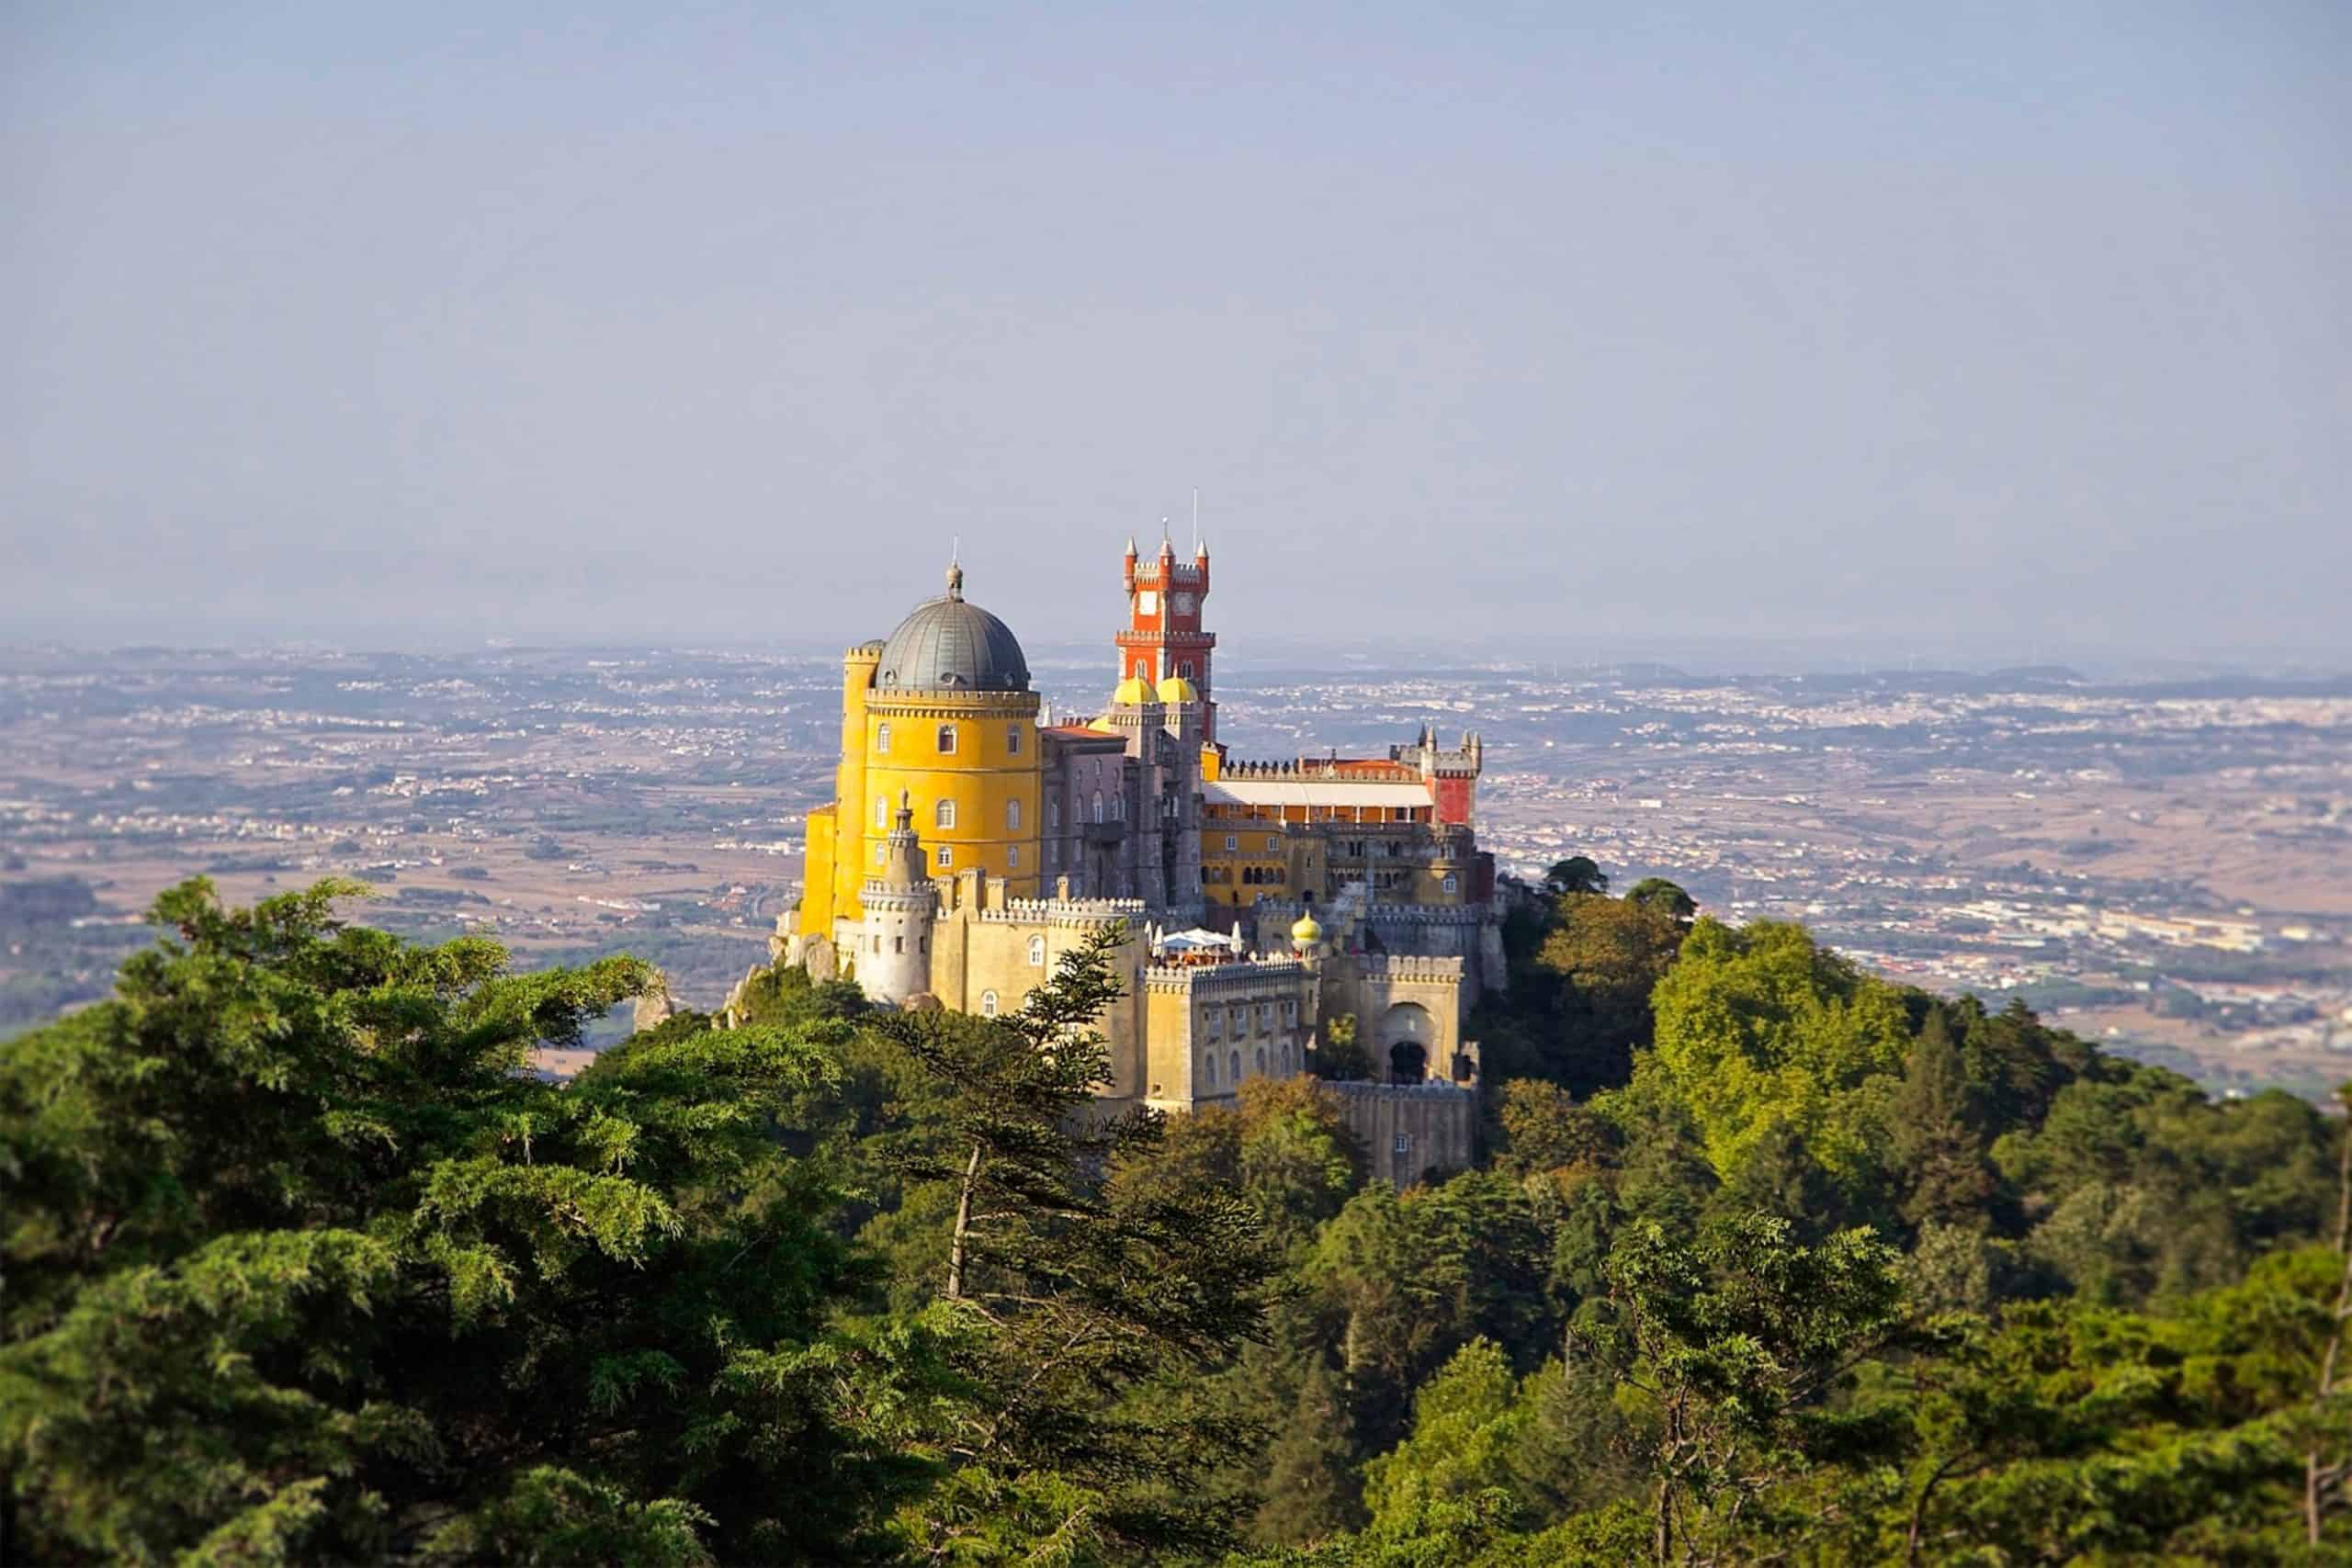 Pena palace in sintra, portugal, stands atop a hill surrounded by greenery, with the countryside stretching into the distance.